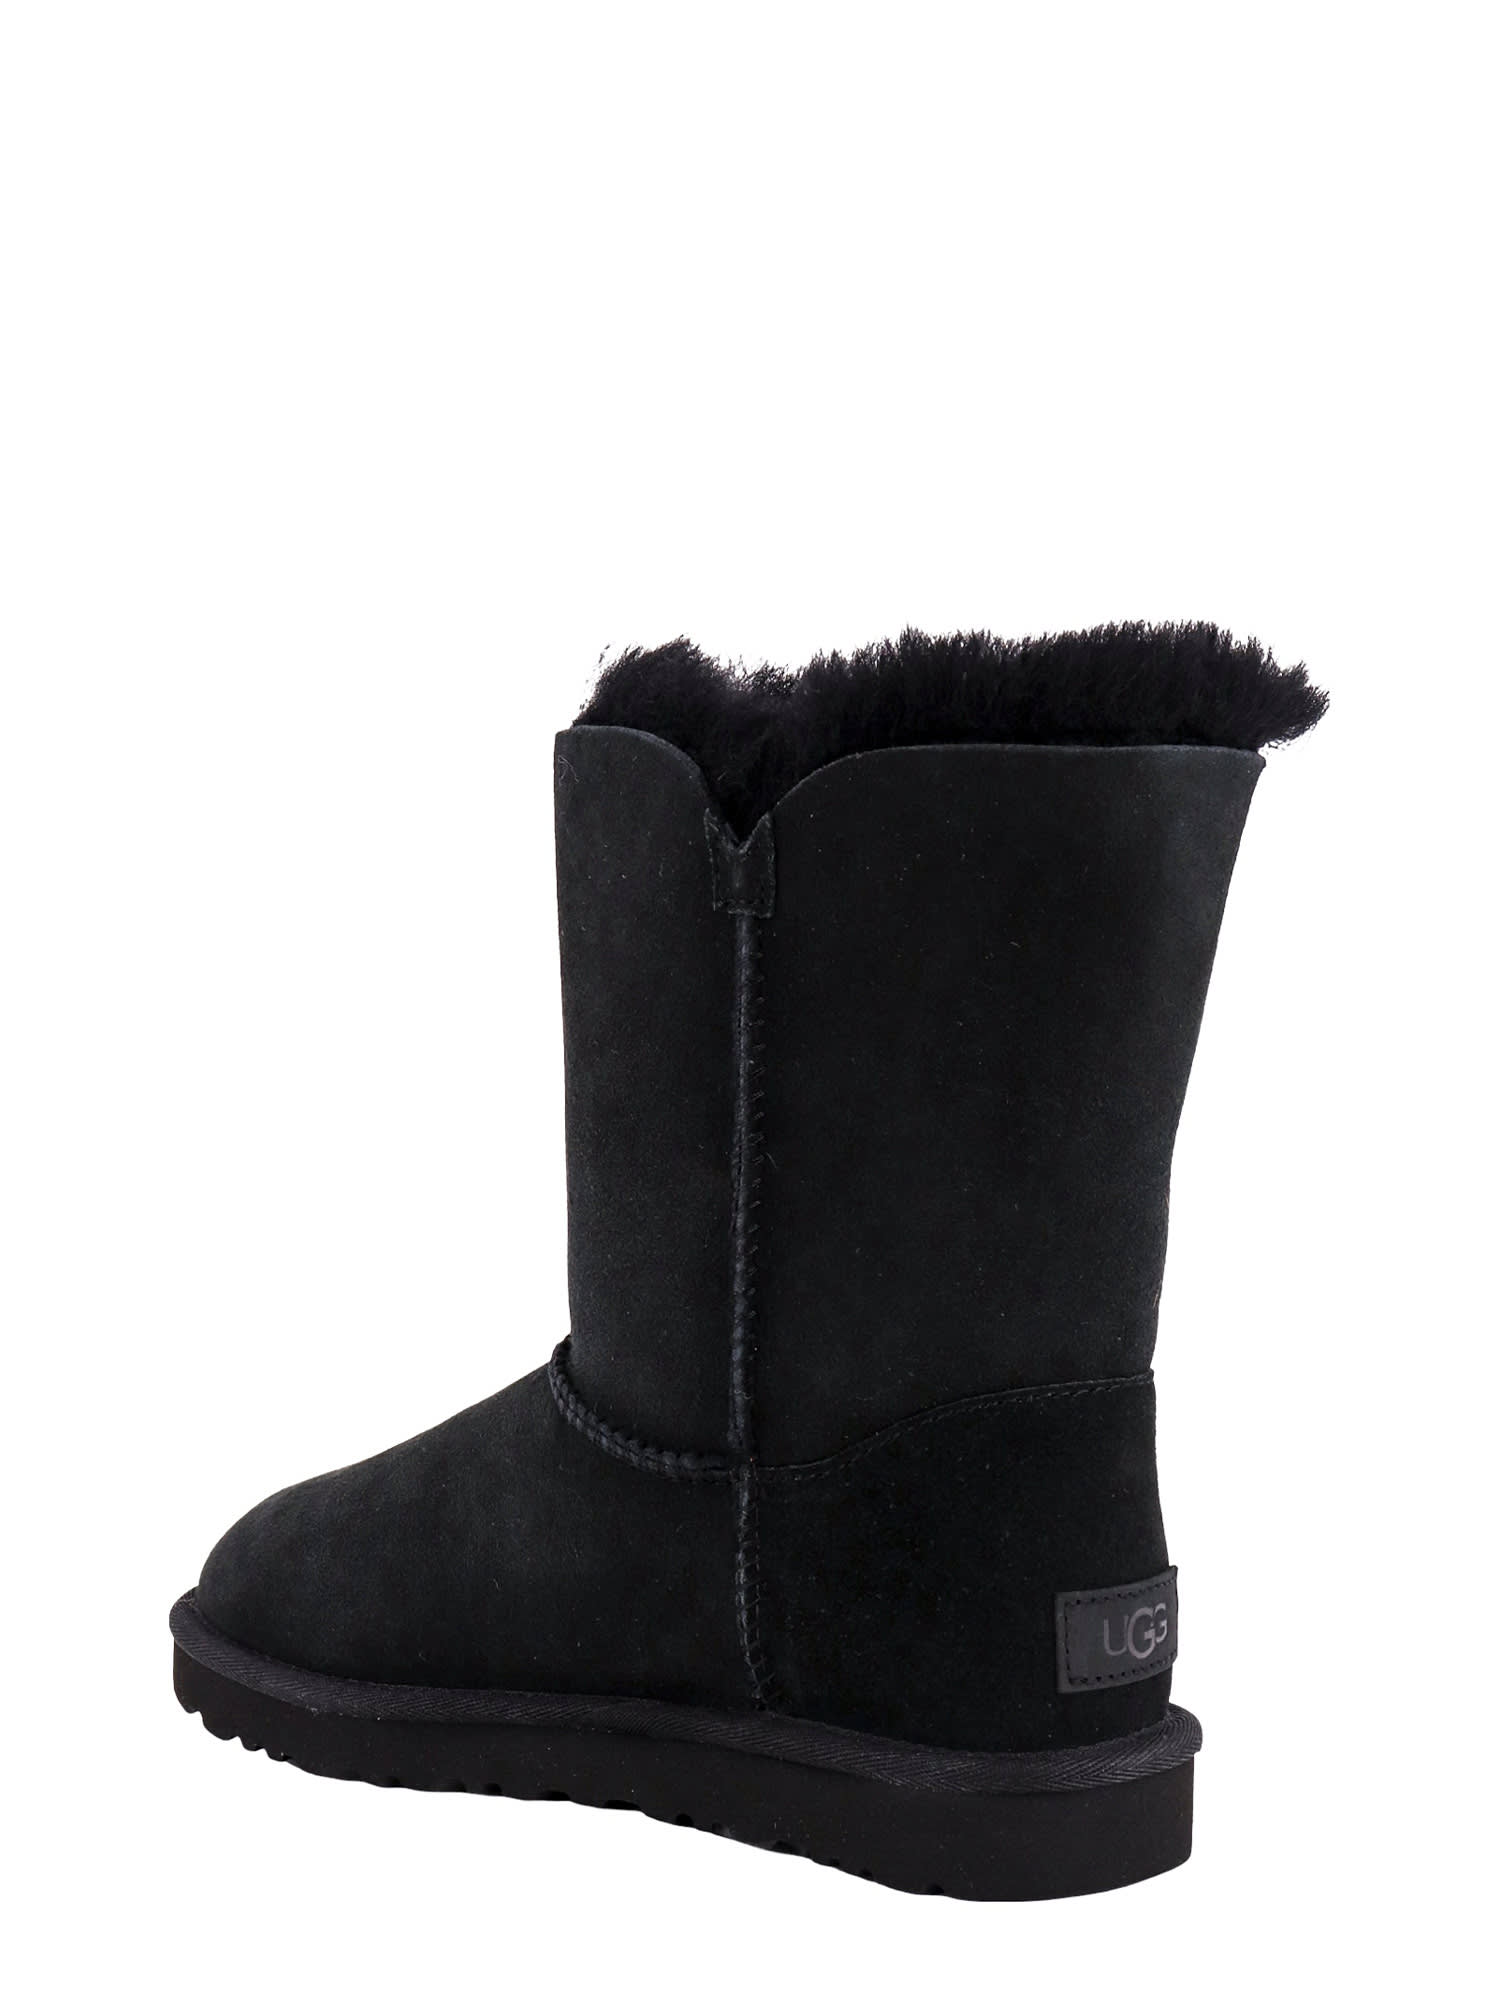 Shop Ugg Bailey Button Boots In Black